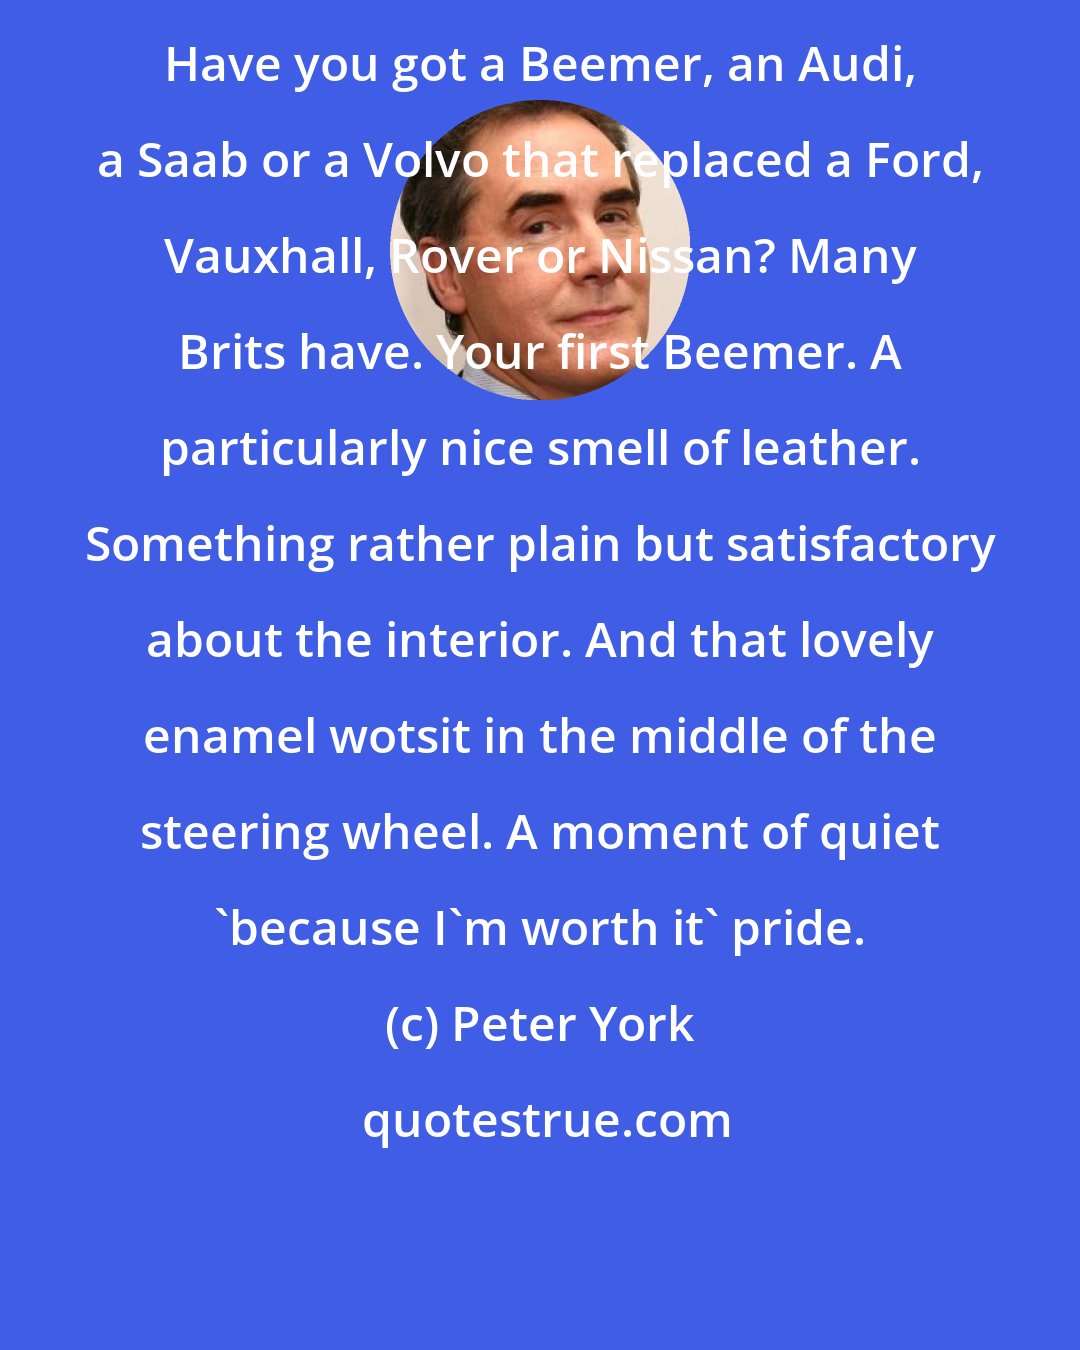 Peter York: Have you got a Beemer, an Audi, a Saab or a Volvo that replaced a Ford, Vauxhall, Rover or Nissan? Many Brits have. Your first Beemer. A particularly nice smell of leather. Something rather plain but satisfactory about the interior. And that lovely enamel wotsit in the middle of the steering wheel. A moment of quiet 'because I'm worth it' pride.